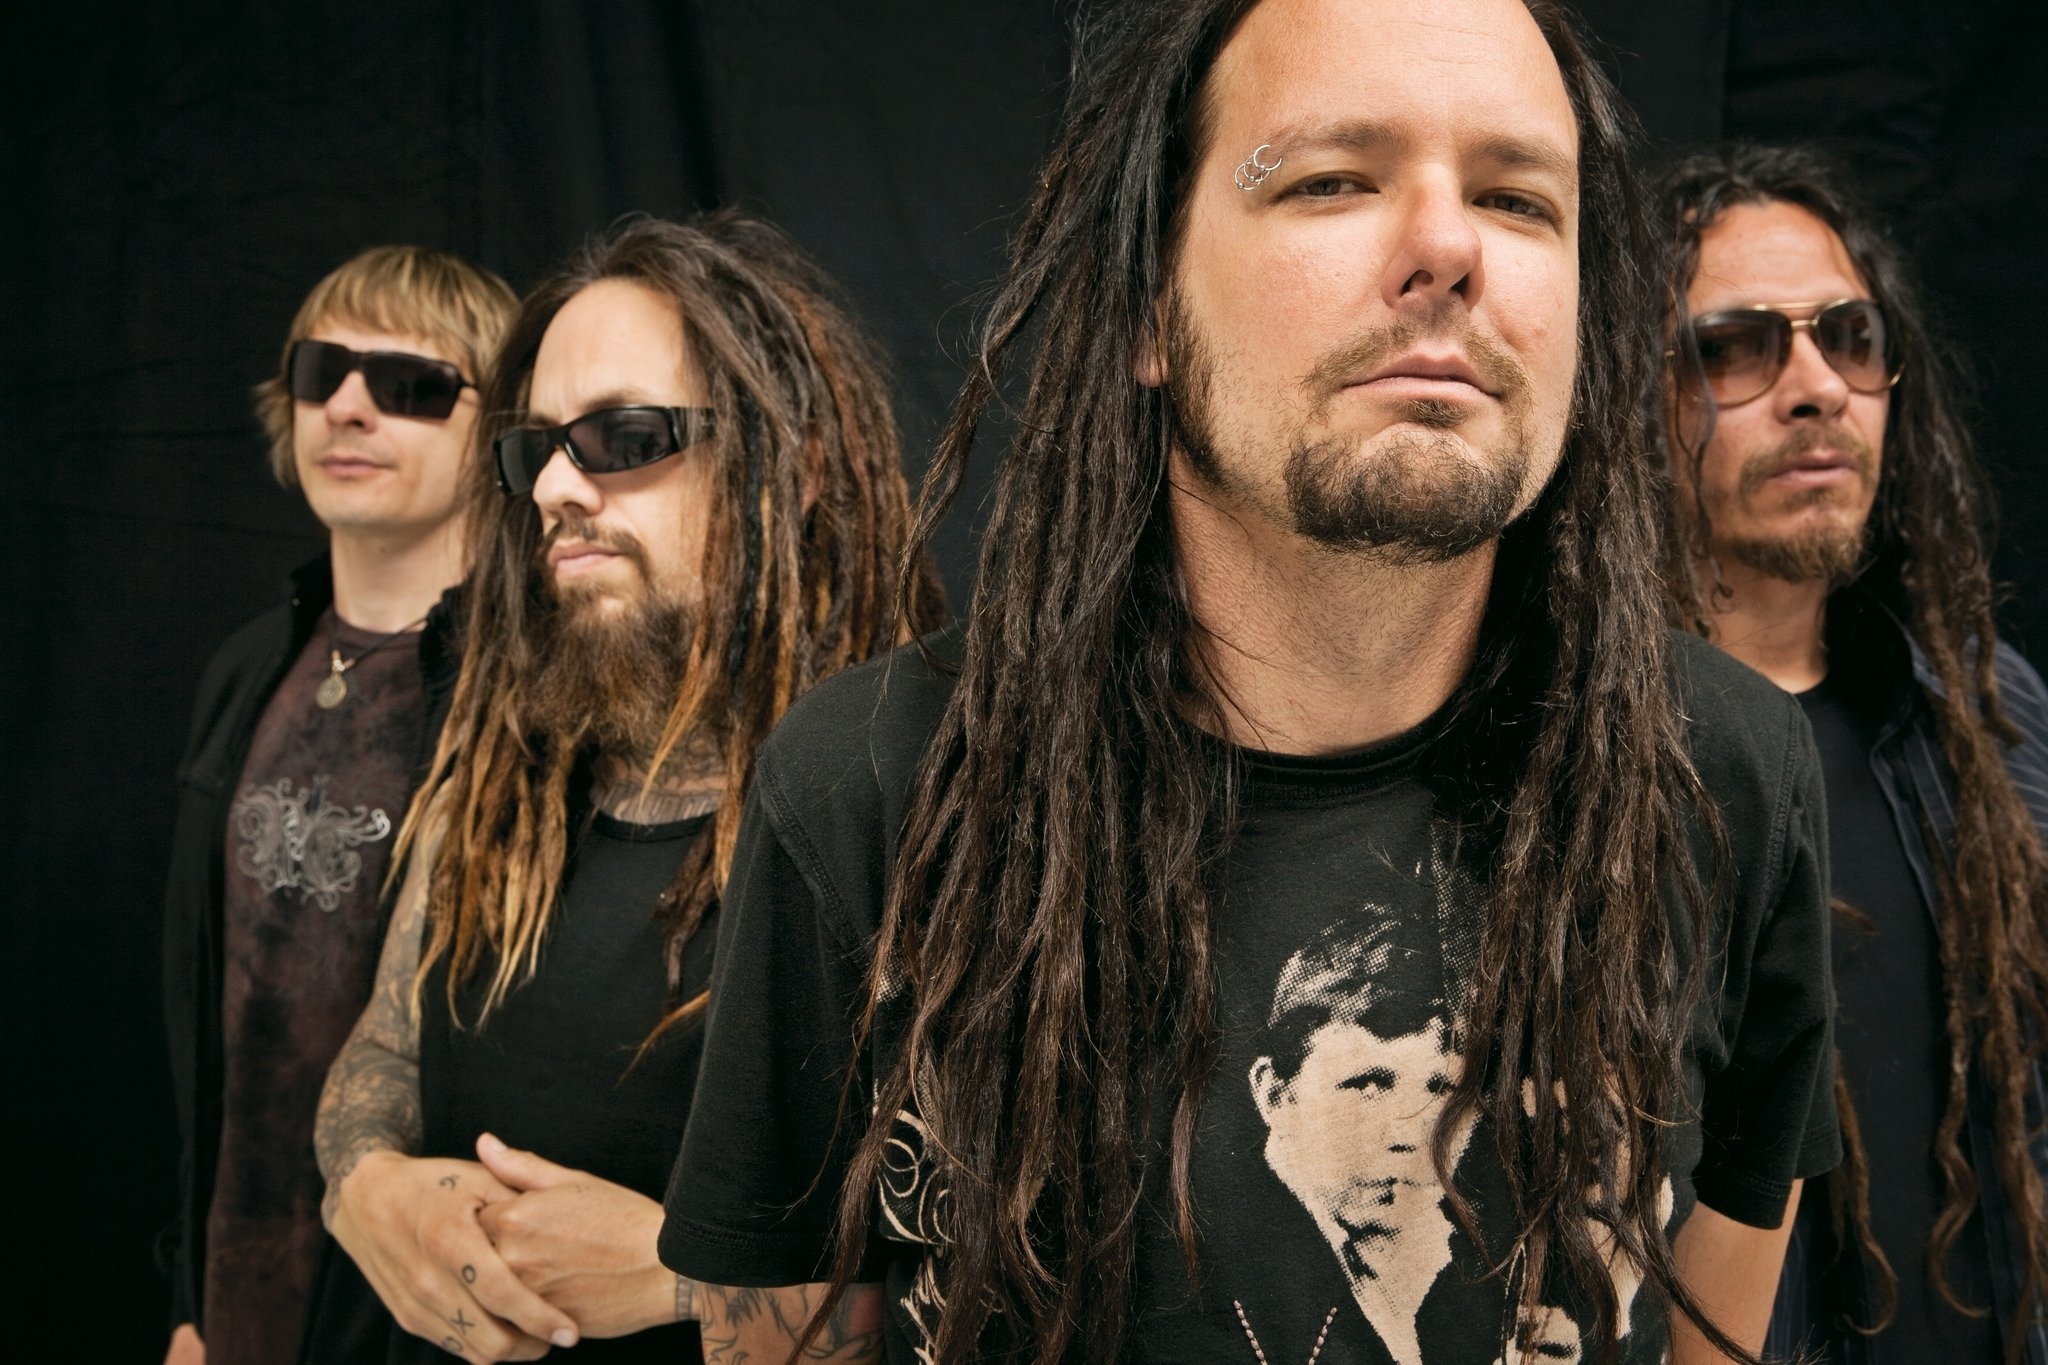 Korn wallpapers, HQ images, Music band, 4k pictures, 2050x1370 HD Desktop